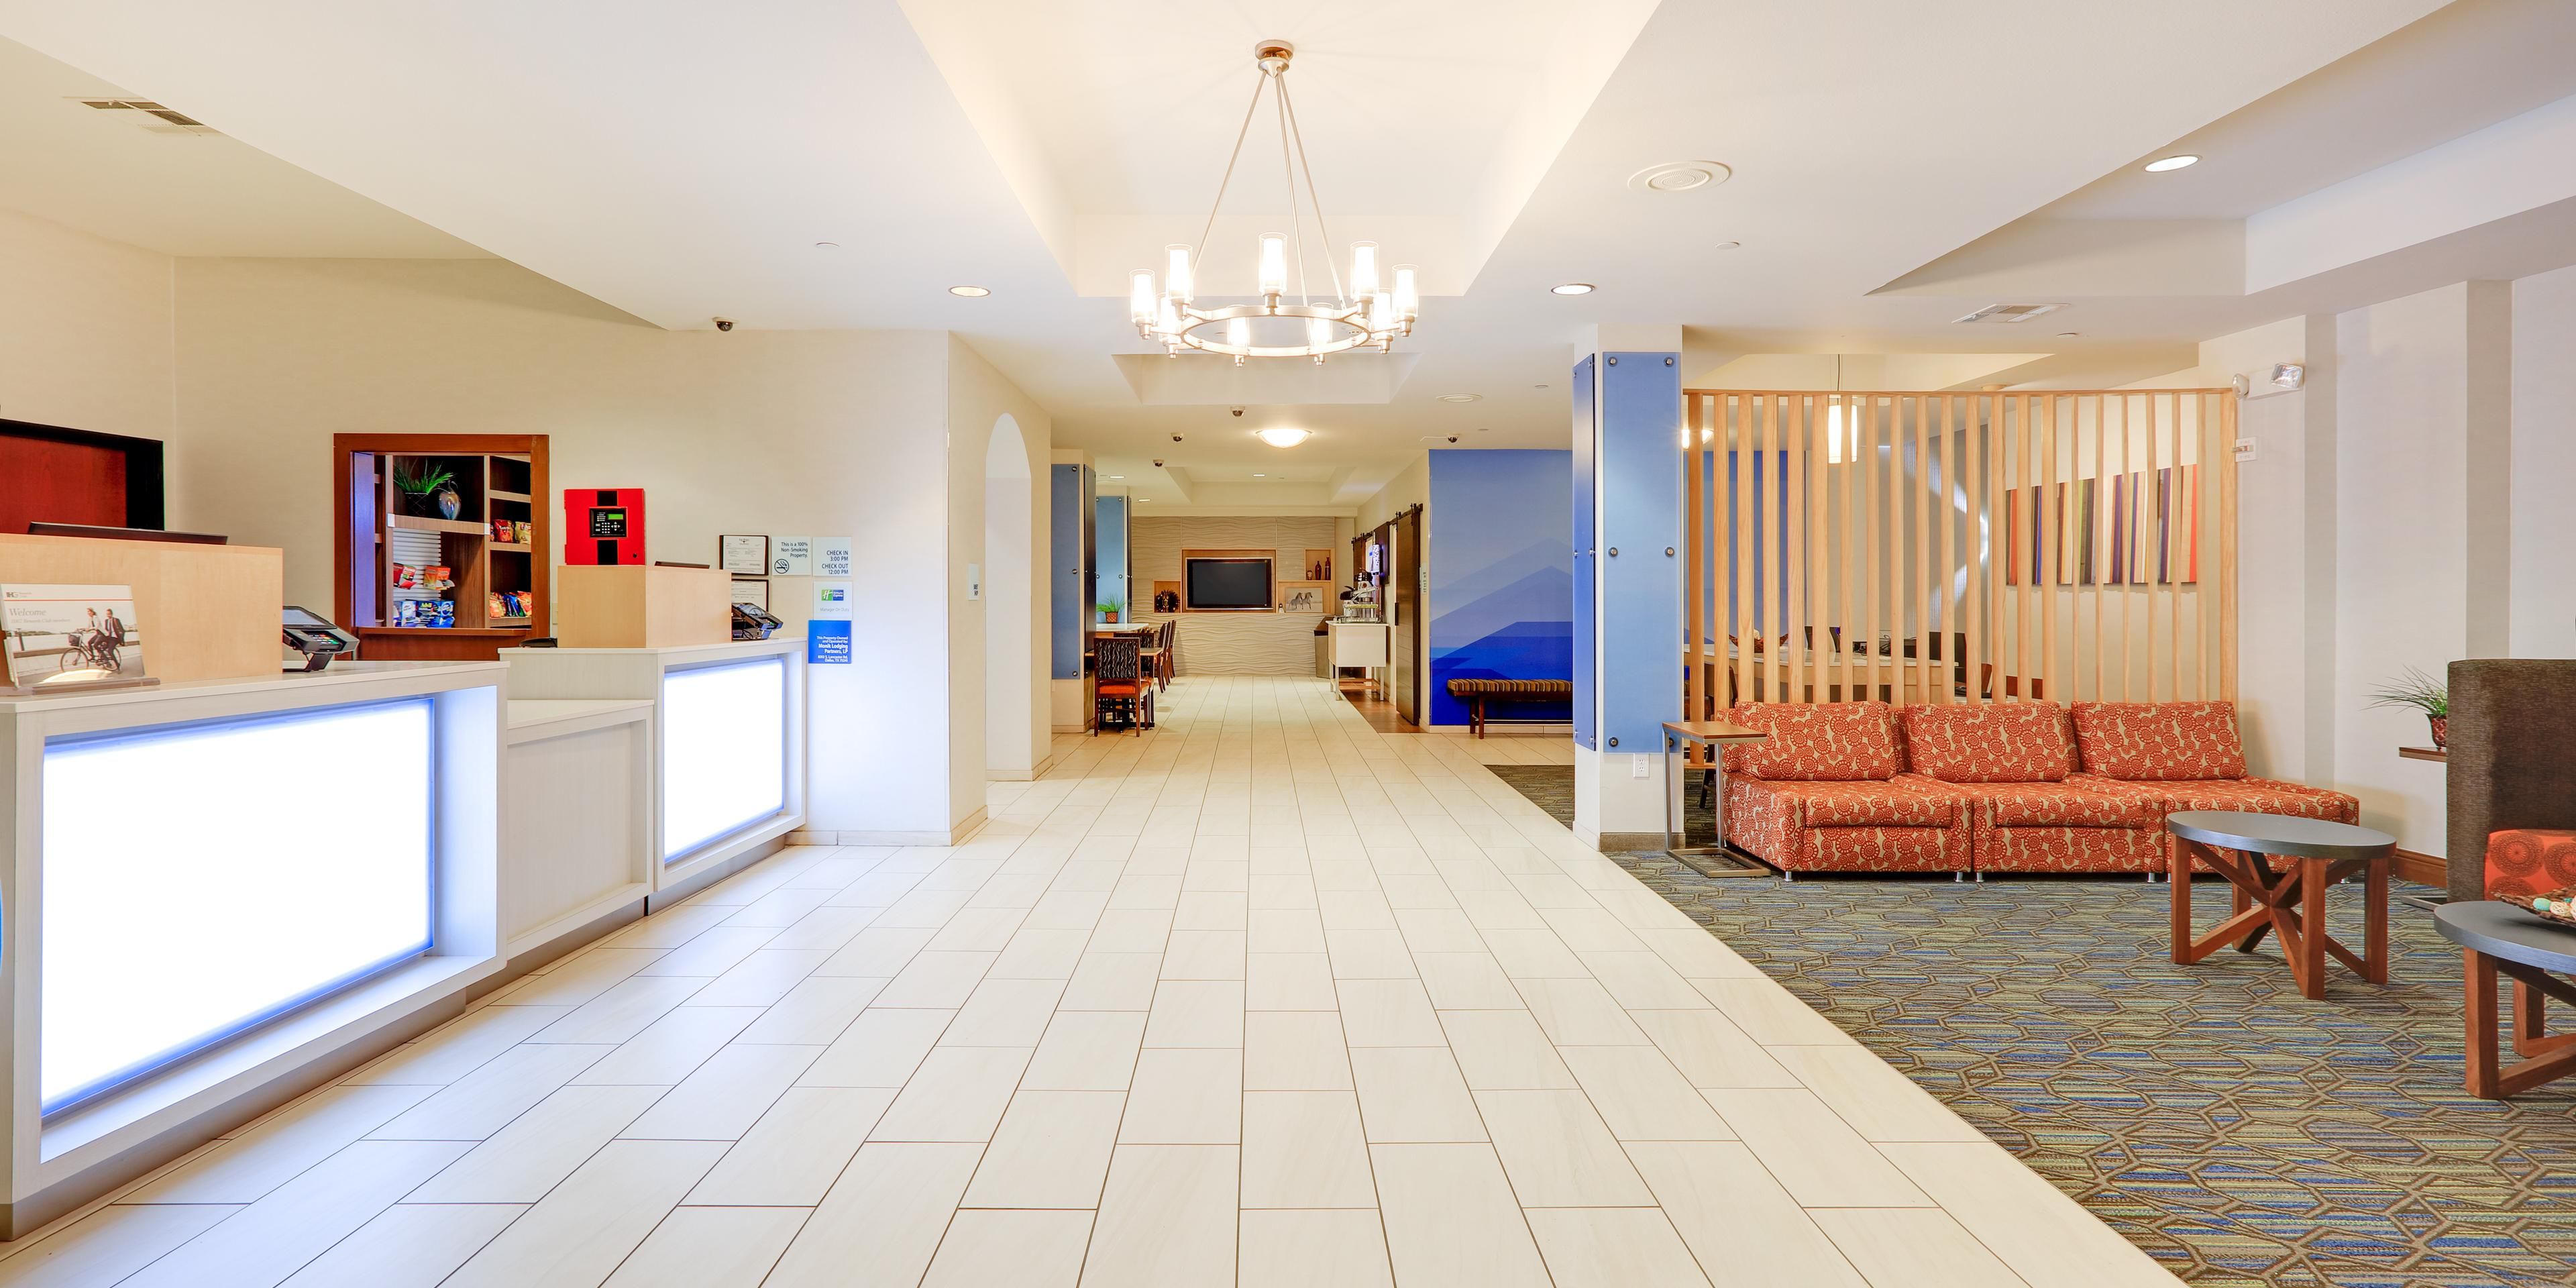 Our hotel follows the highest standards of clean and cleanliness especially during the COVID19 Pandemic. We are thoroughly cleaning and disinfecting all guest rooms and public areas. 